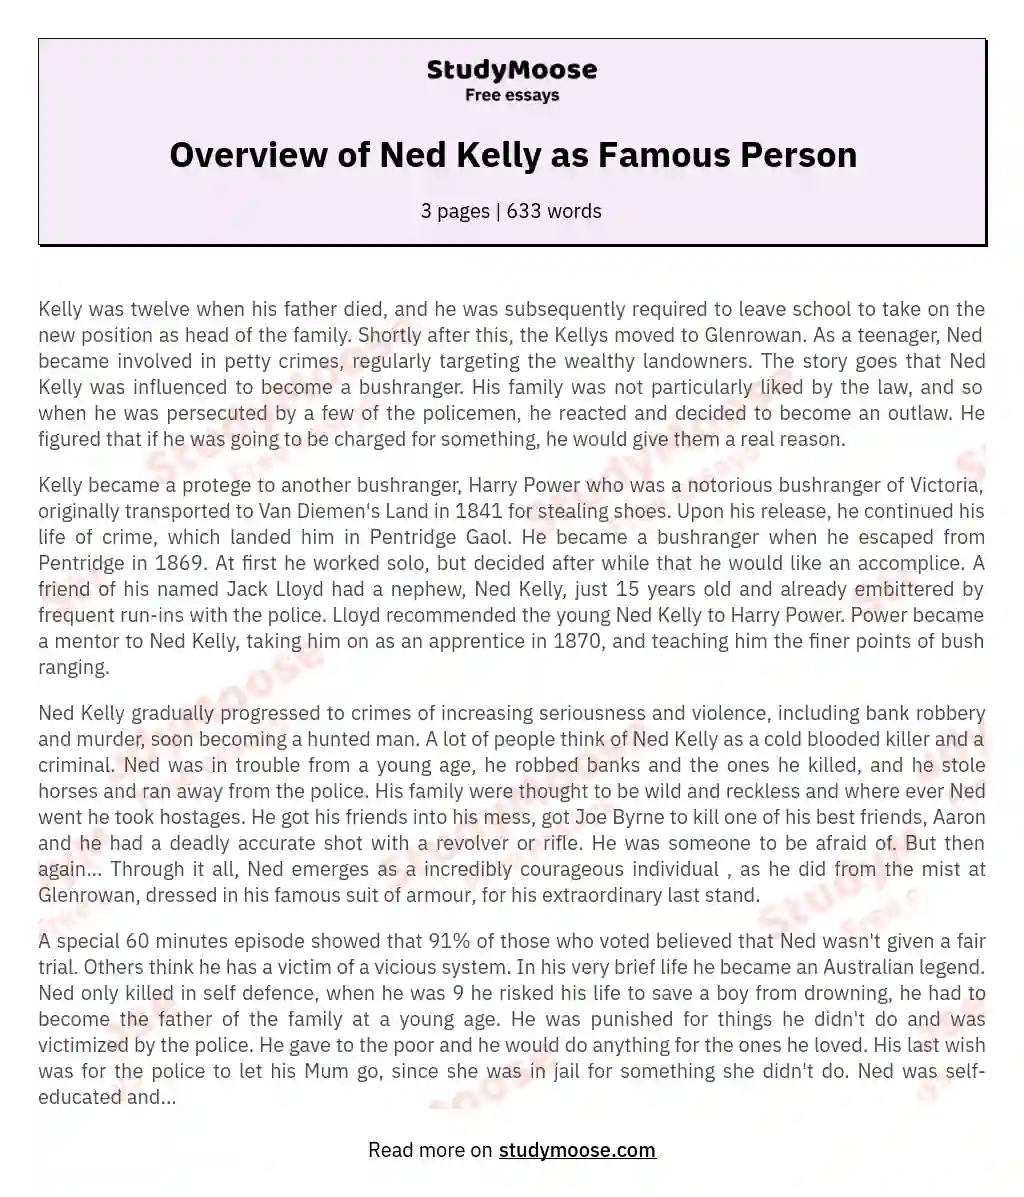 Overview of Ned Kelly as Famous Person